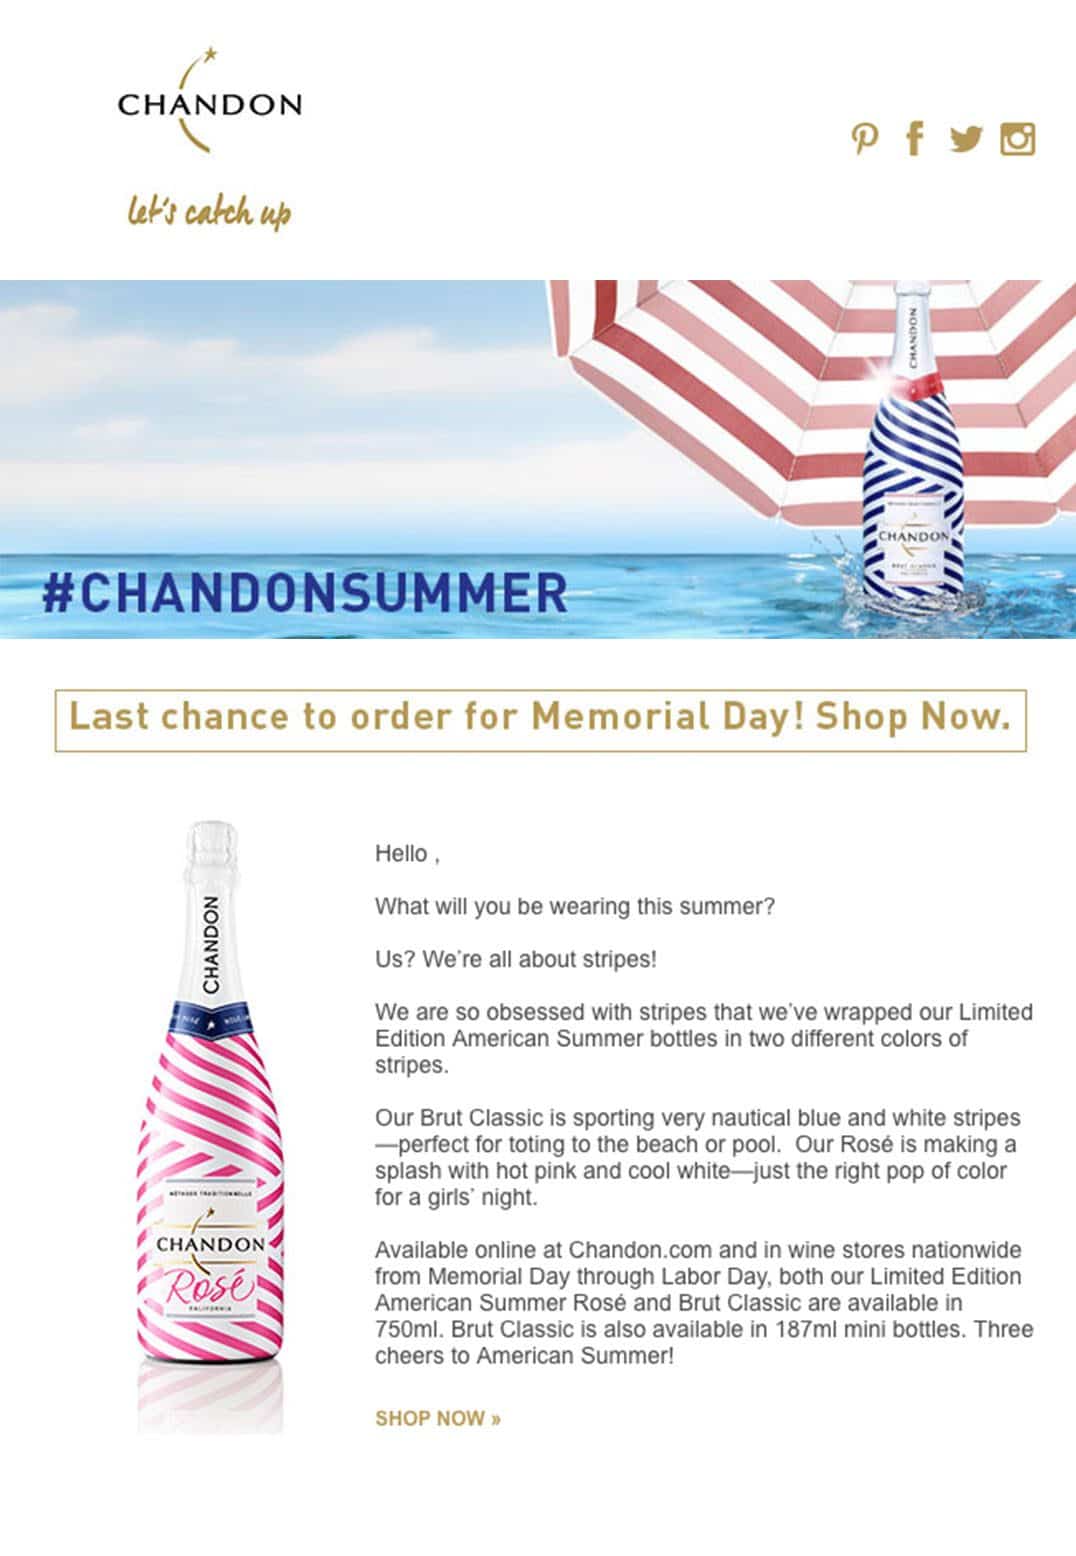 In emails, but especially in email visuals, your text to image ratio should look clean. Chandon's email example here does that well.